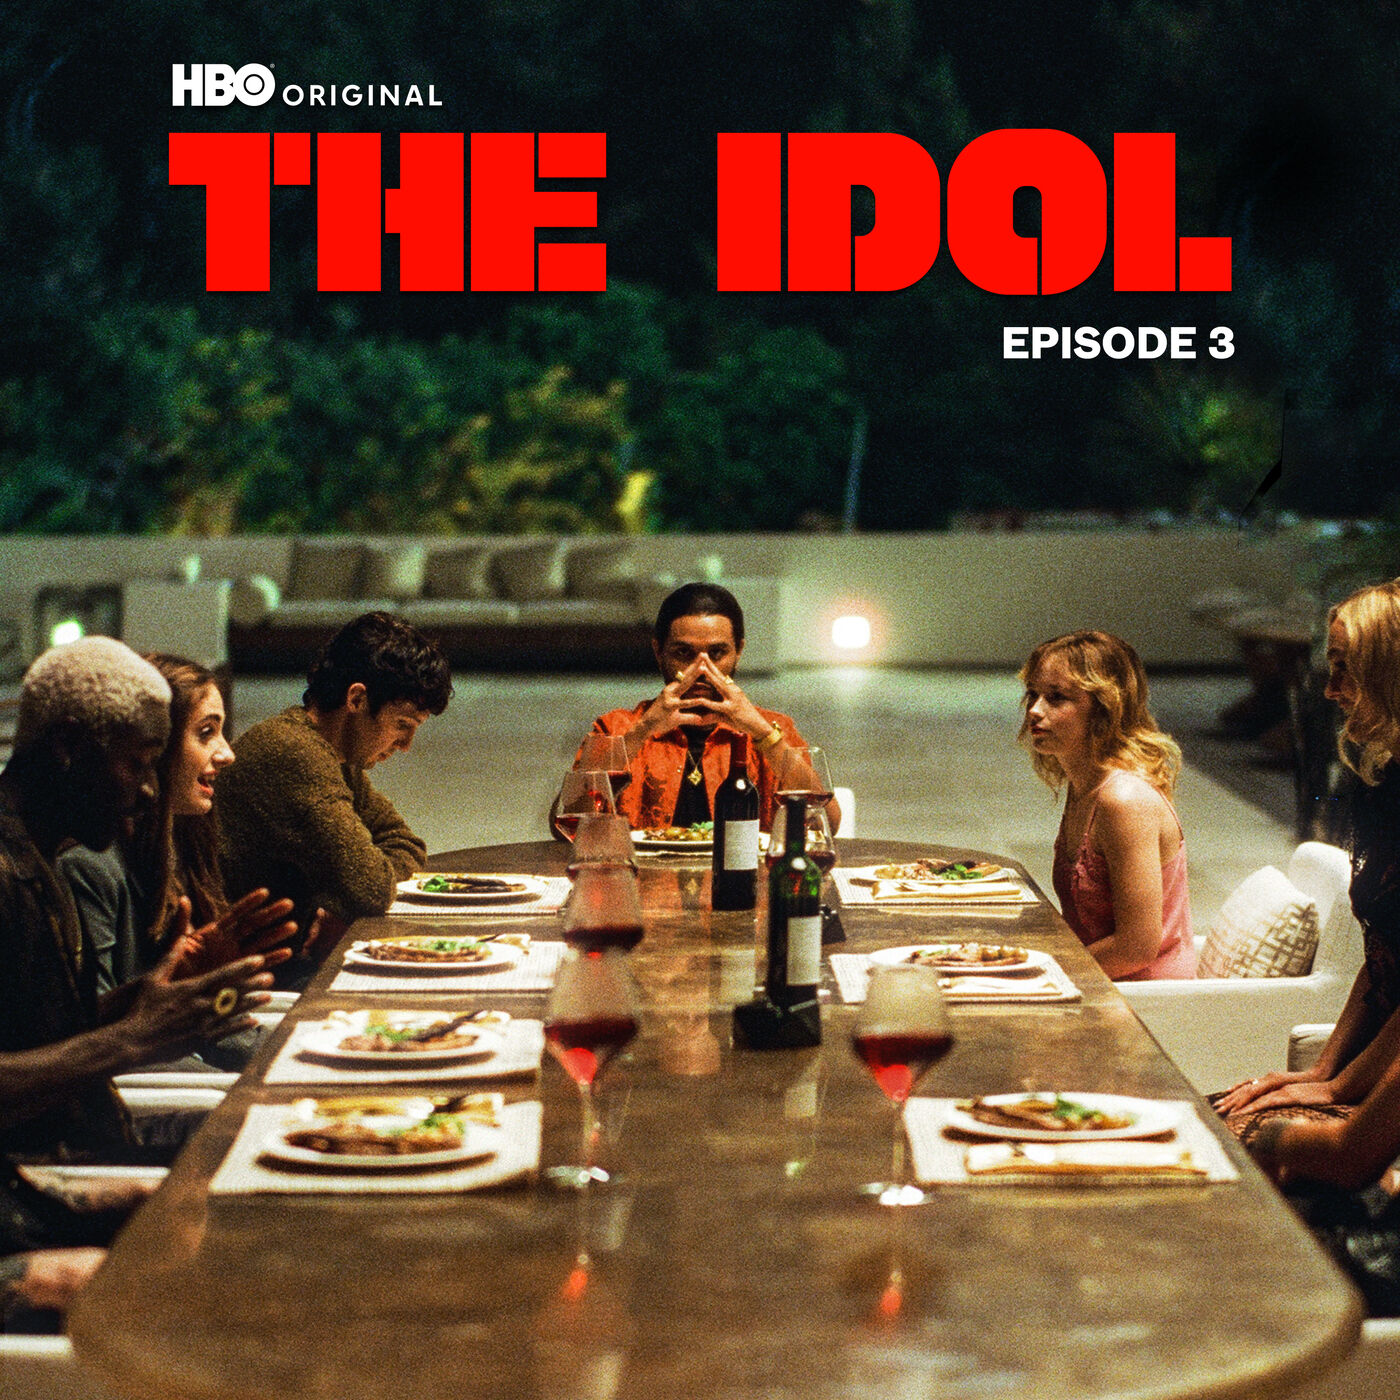 The Weeknd – The Idol Episode 3 (Music from the HBO Original Series)【88.2kHz／24bit】美国区-OppsUpro音乐帝国